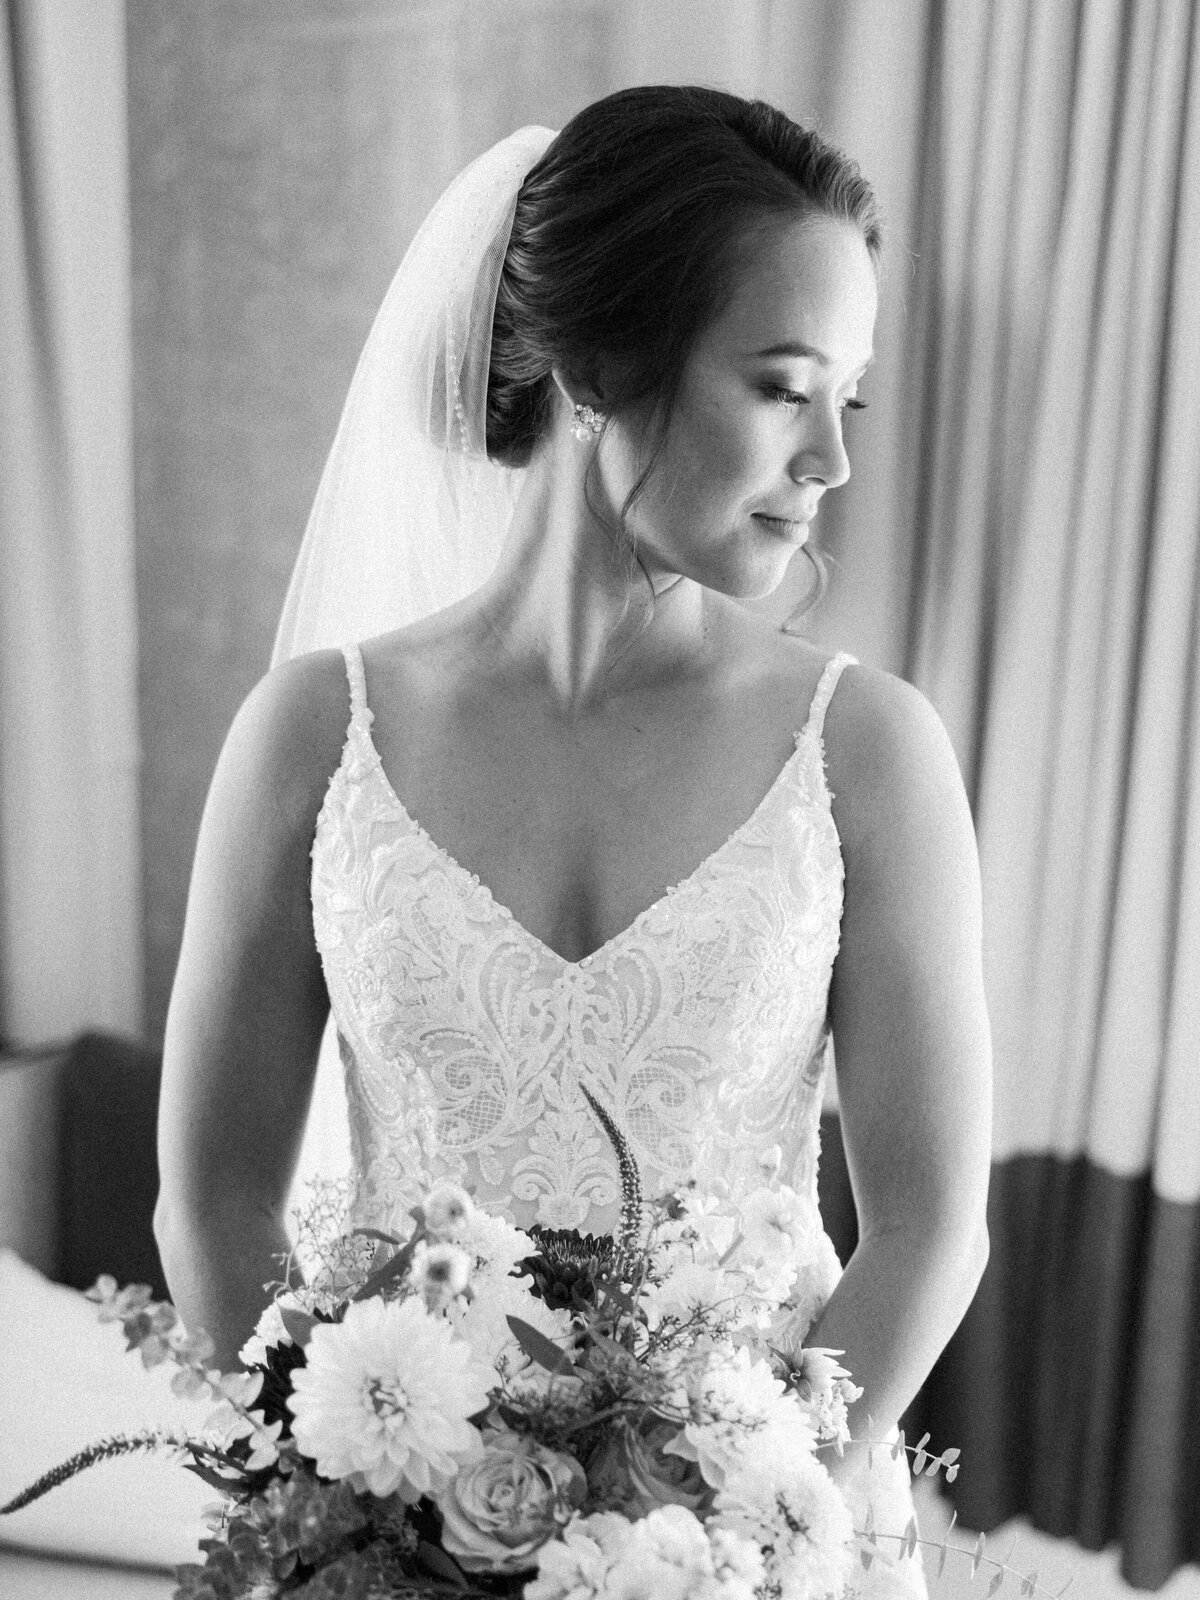 A black and white portrait of a bride as she holds her bouquet at her waist and looks down her shoulder as soft window light falls gently on her face